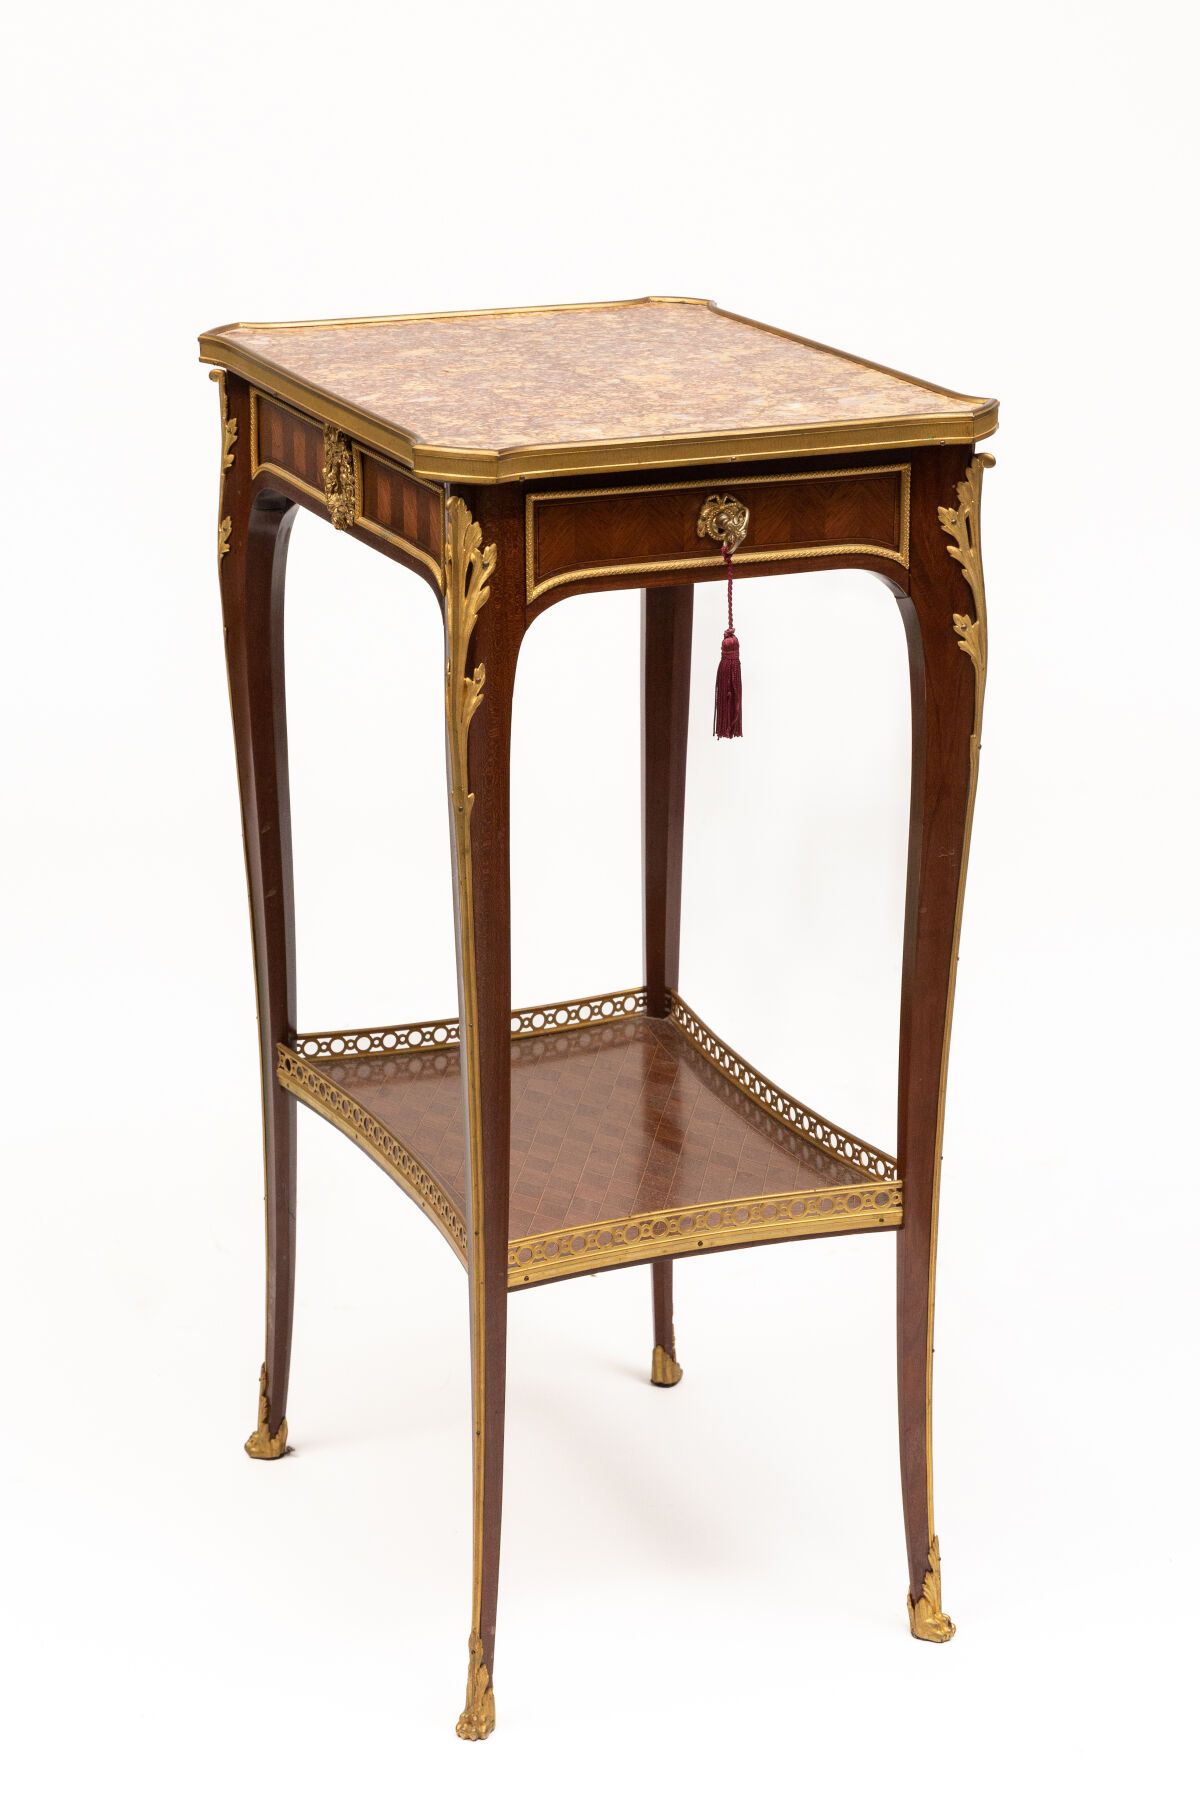 Null Paul SORMANI (1817-1877), Paris.

Side table in marquetry and rosewood vene&hellip;